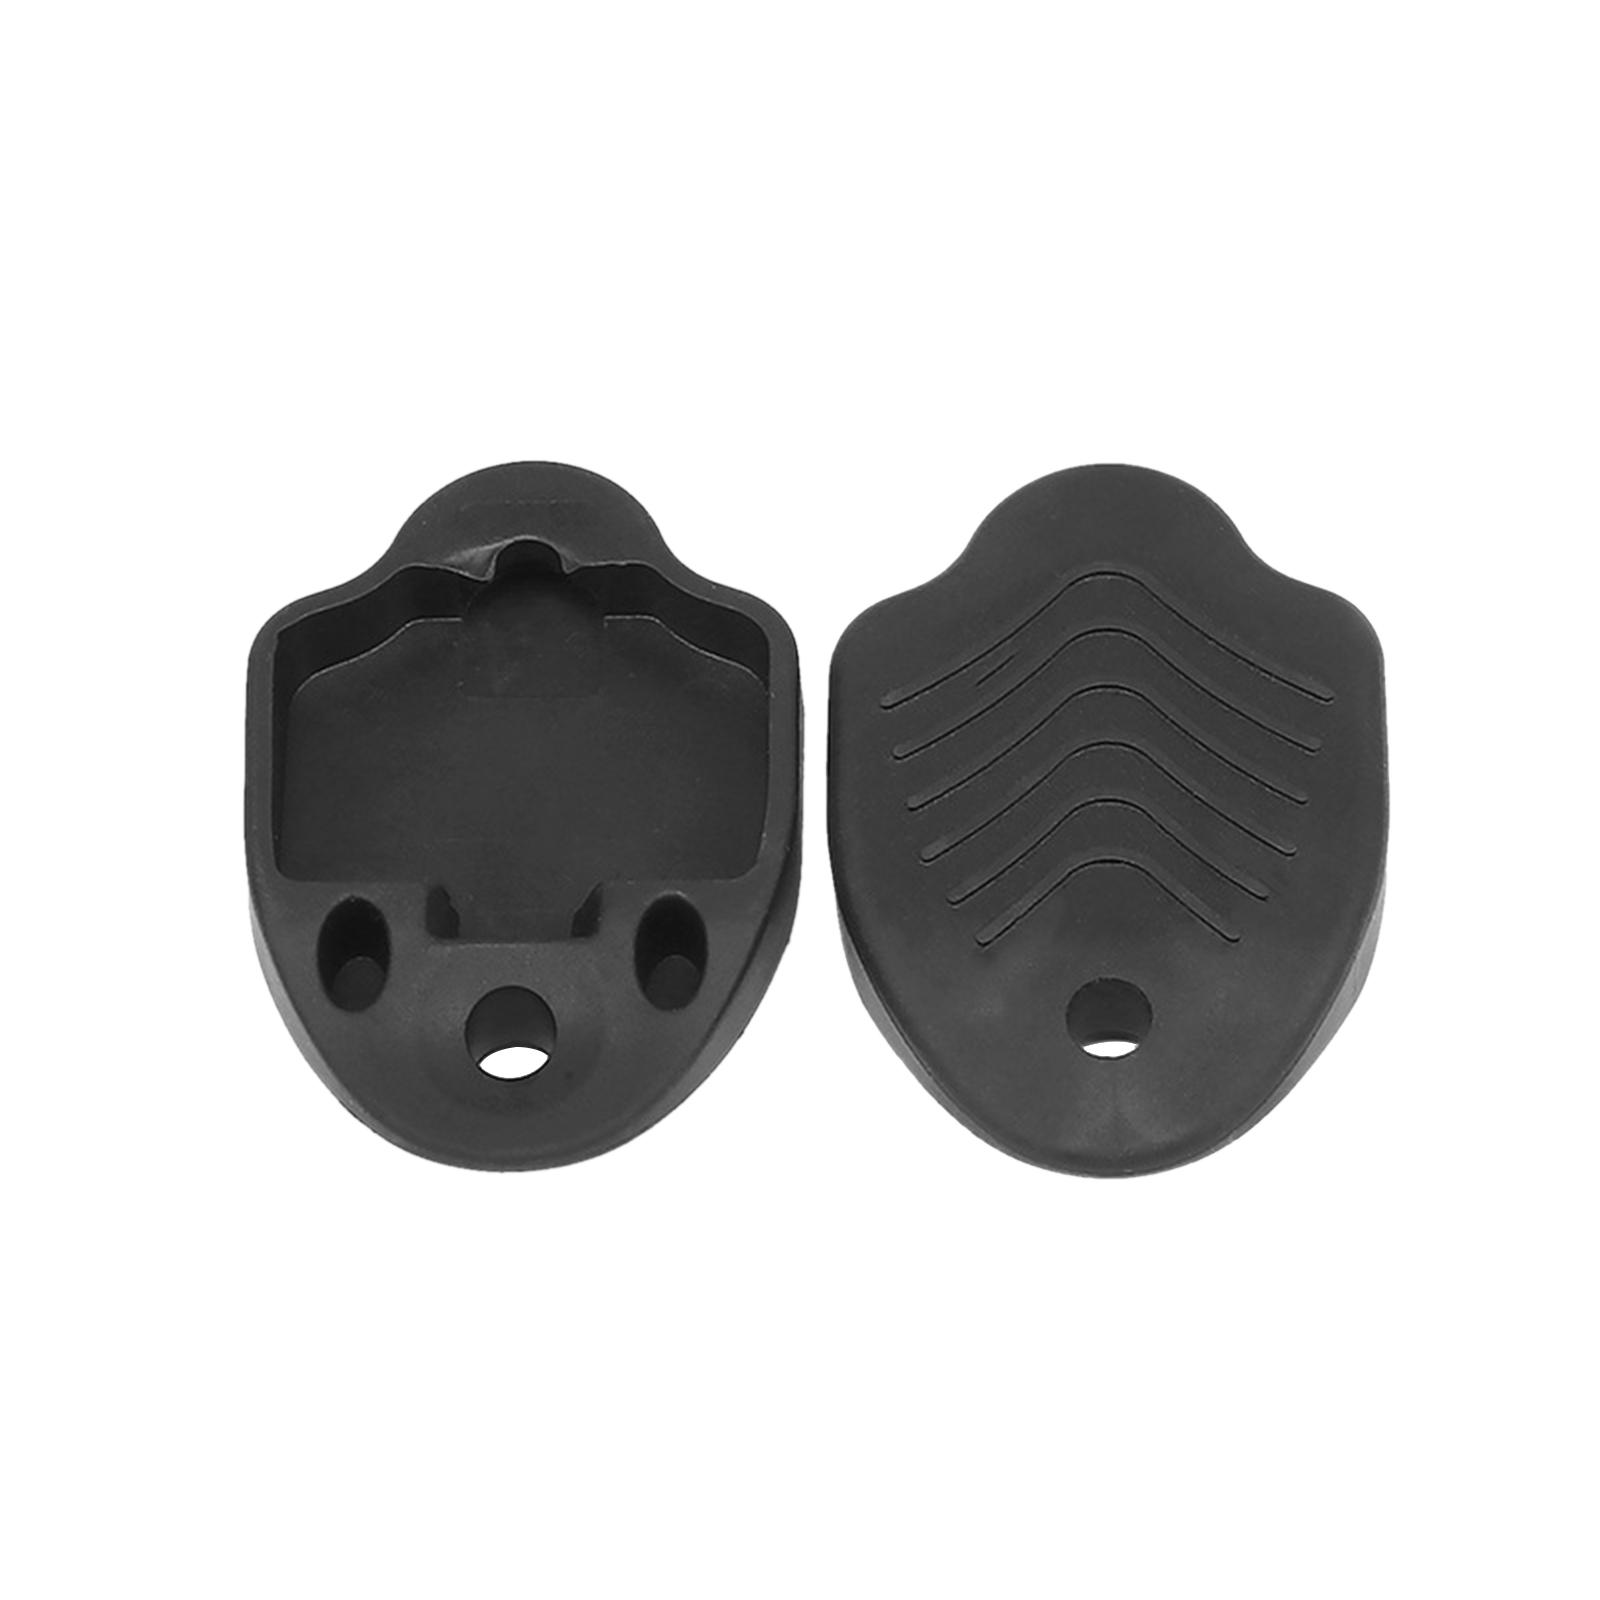 2Pcs Cleat Covers, Cycle Shoes Cleat Cleat Covers Set, Protective Cover Durable Pedals Systems Road Bike - image 3 of 10